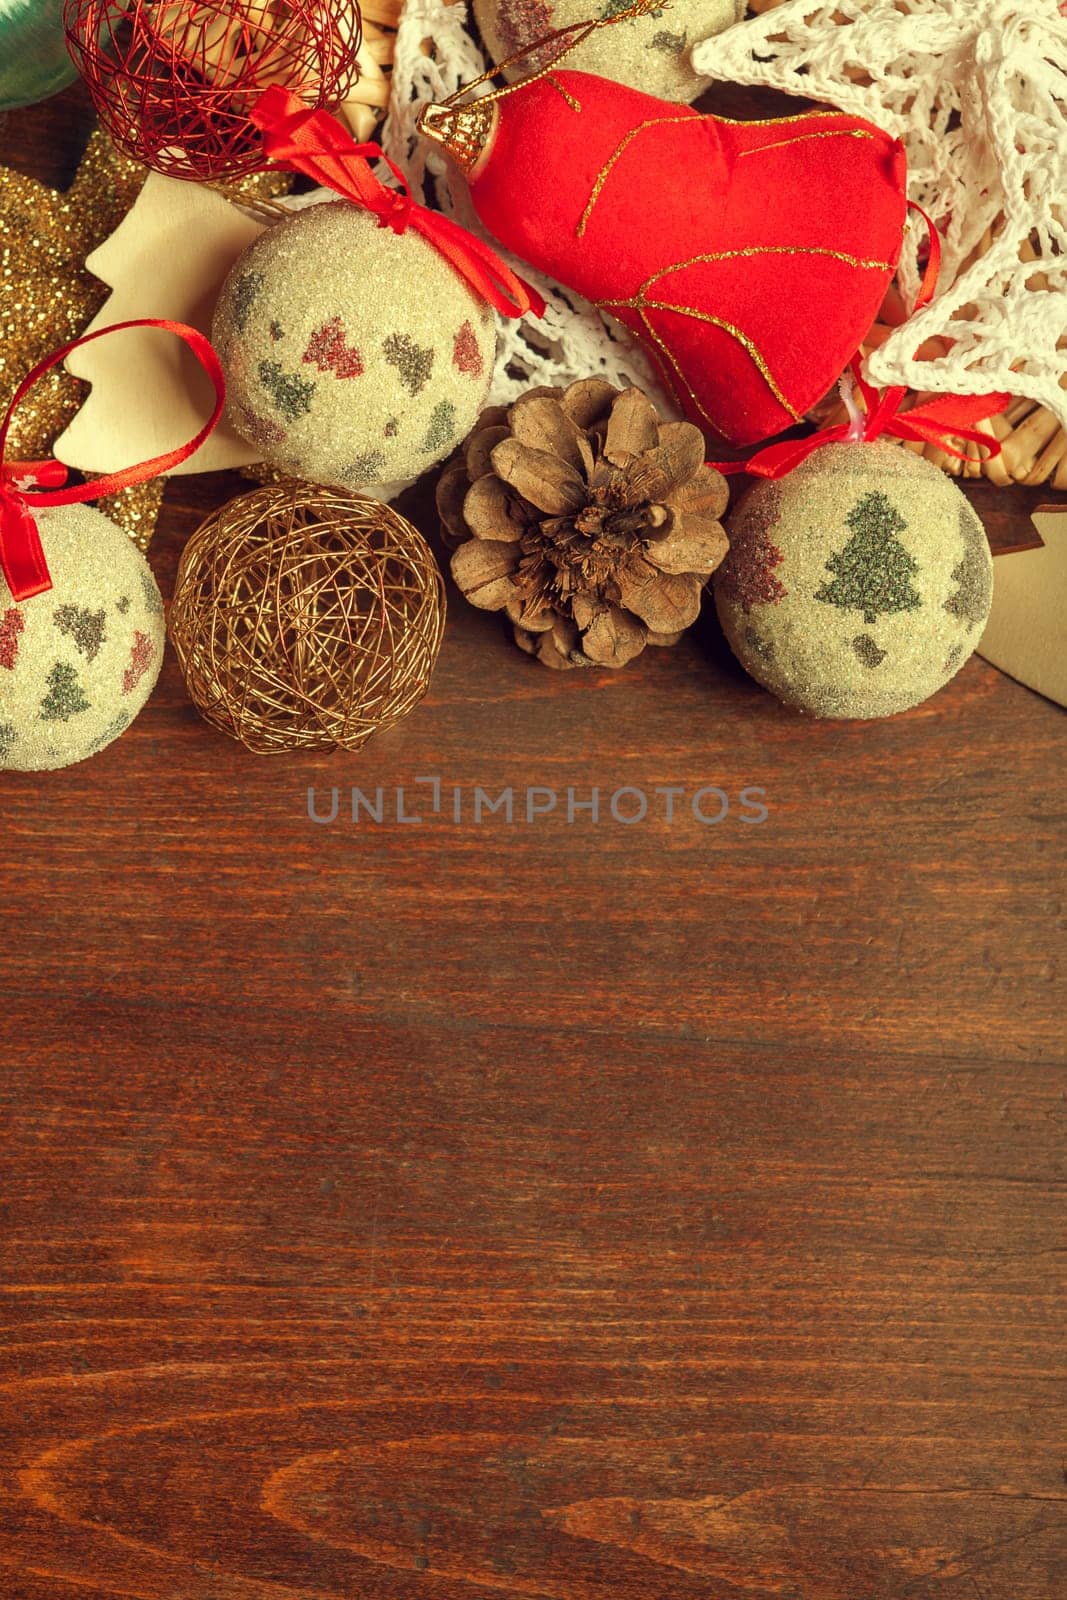 Christmas toys and decorations on wooden table. Xmas ornaments